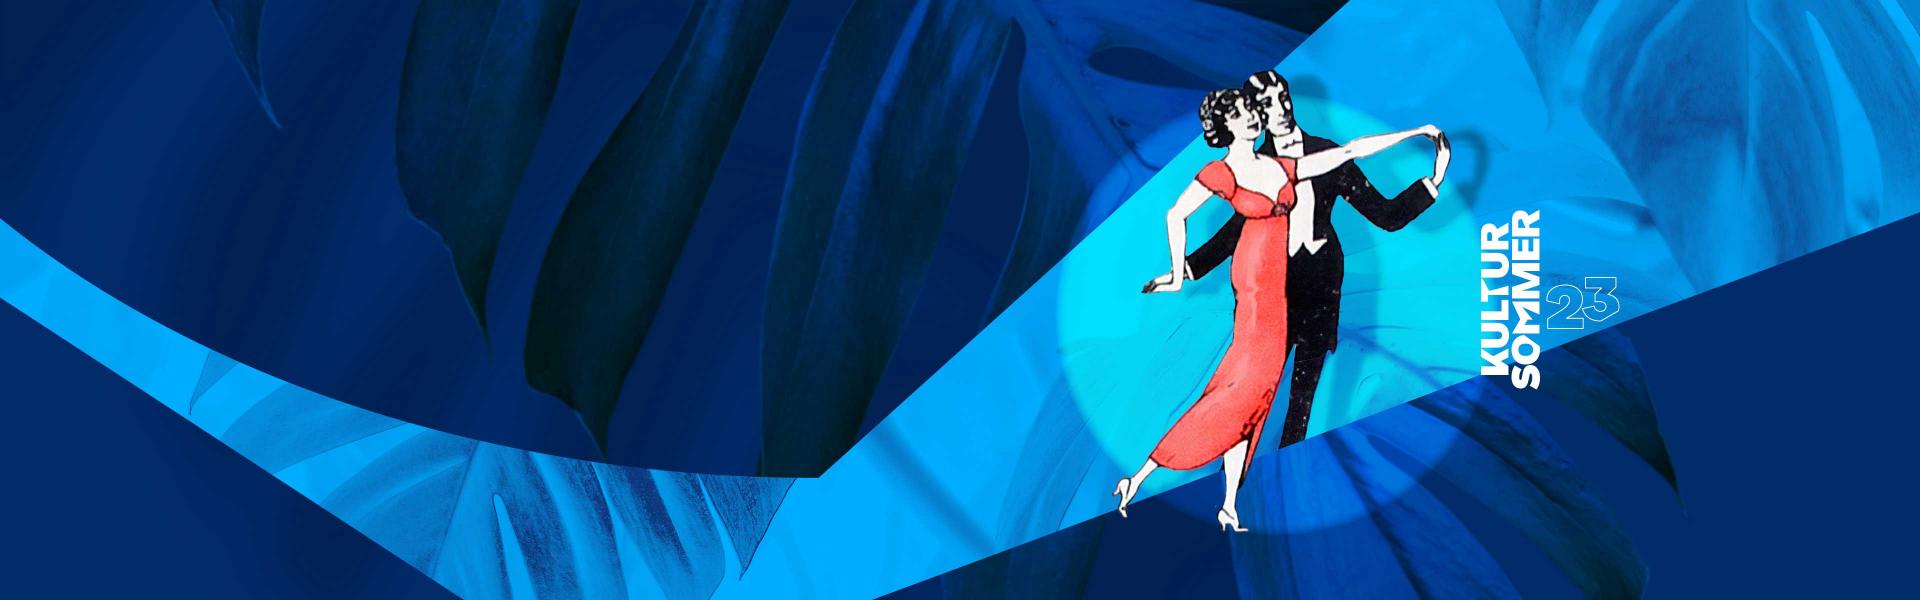 Graphic shows couple dancing on blue background. She is wearing a long red dress and he is wearing a black tuxedo.